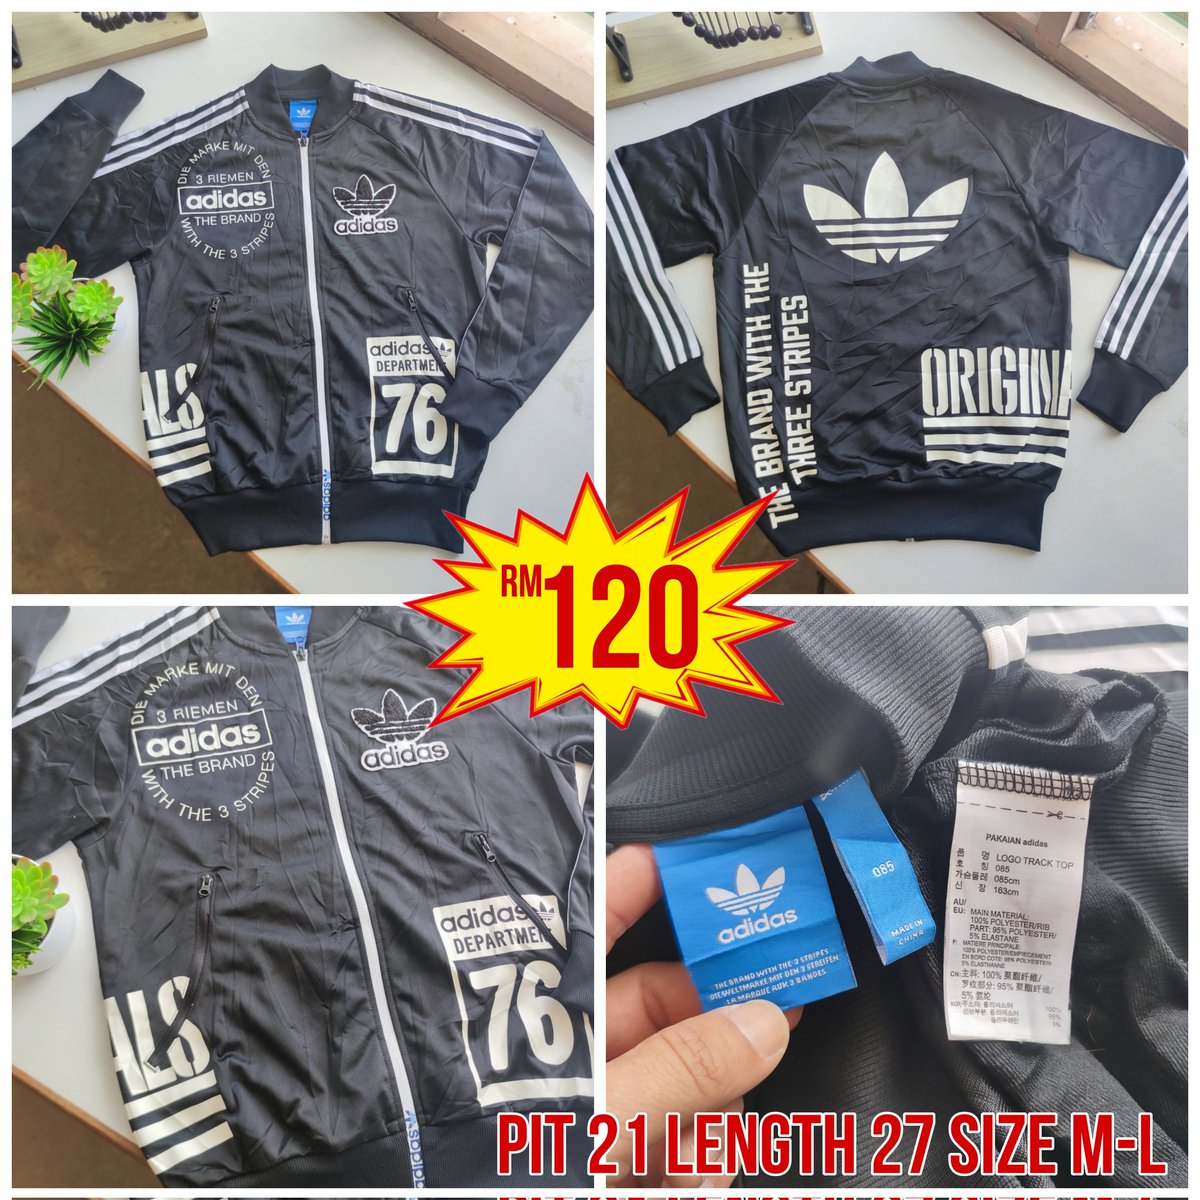 AVAILABLE‼️ AVAILABLE‼️

ADIDAS ORIGINALS LOGO TRACKTOP
COND 9+/10 ✨
 
PRICE : RM120 DFOD

SIZE : M-L (21 x 26.5)

AUTHENTIC ORIGINAL ITEM 💯

#adidasoriginals #adidastracktop